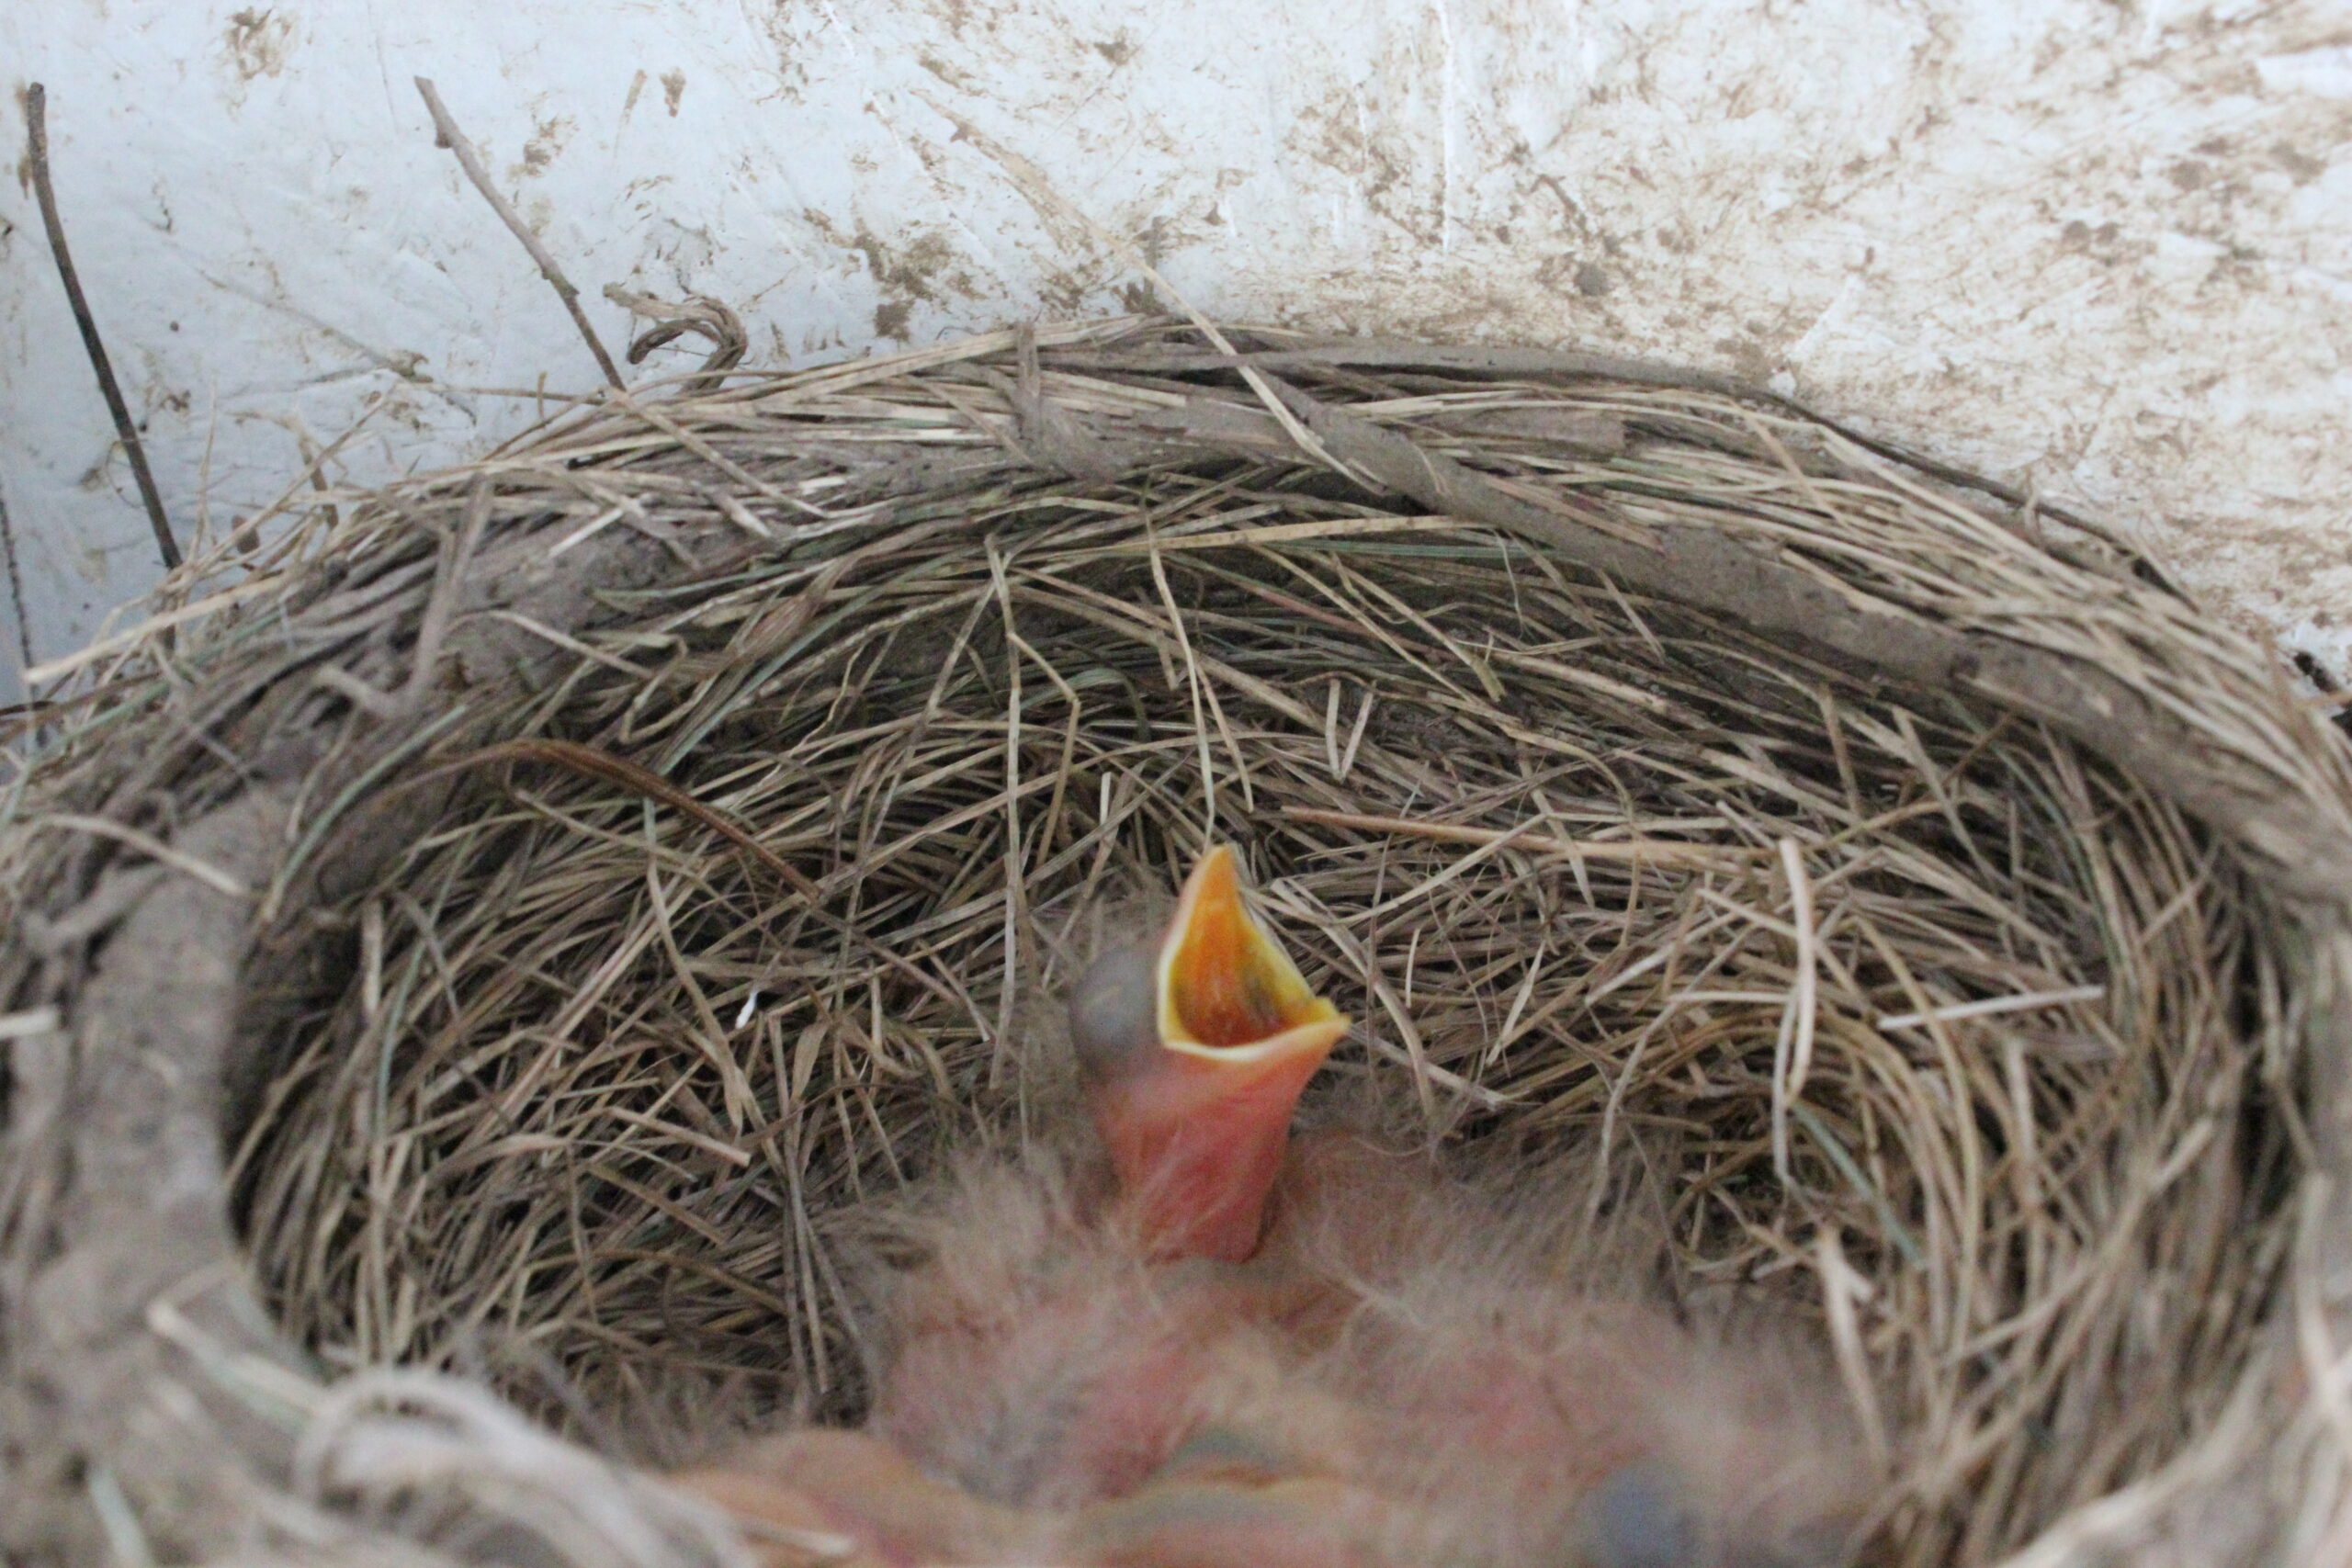 What to Do if You Find a Bird Nest With Eggs or a Baby Bird